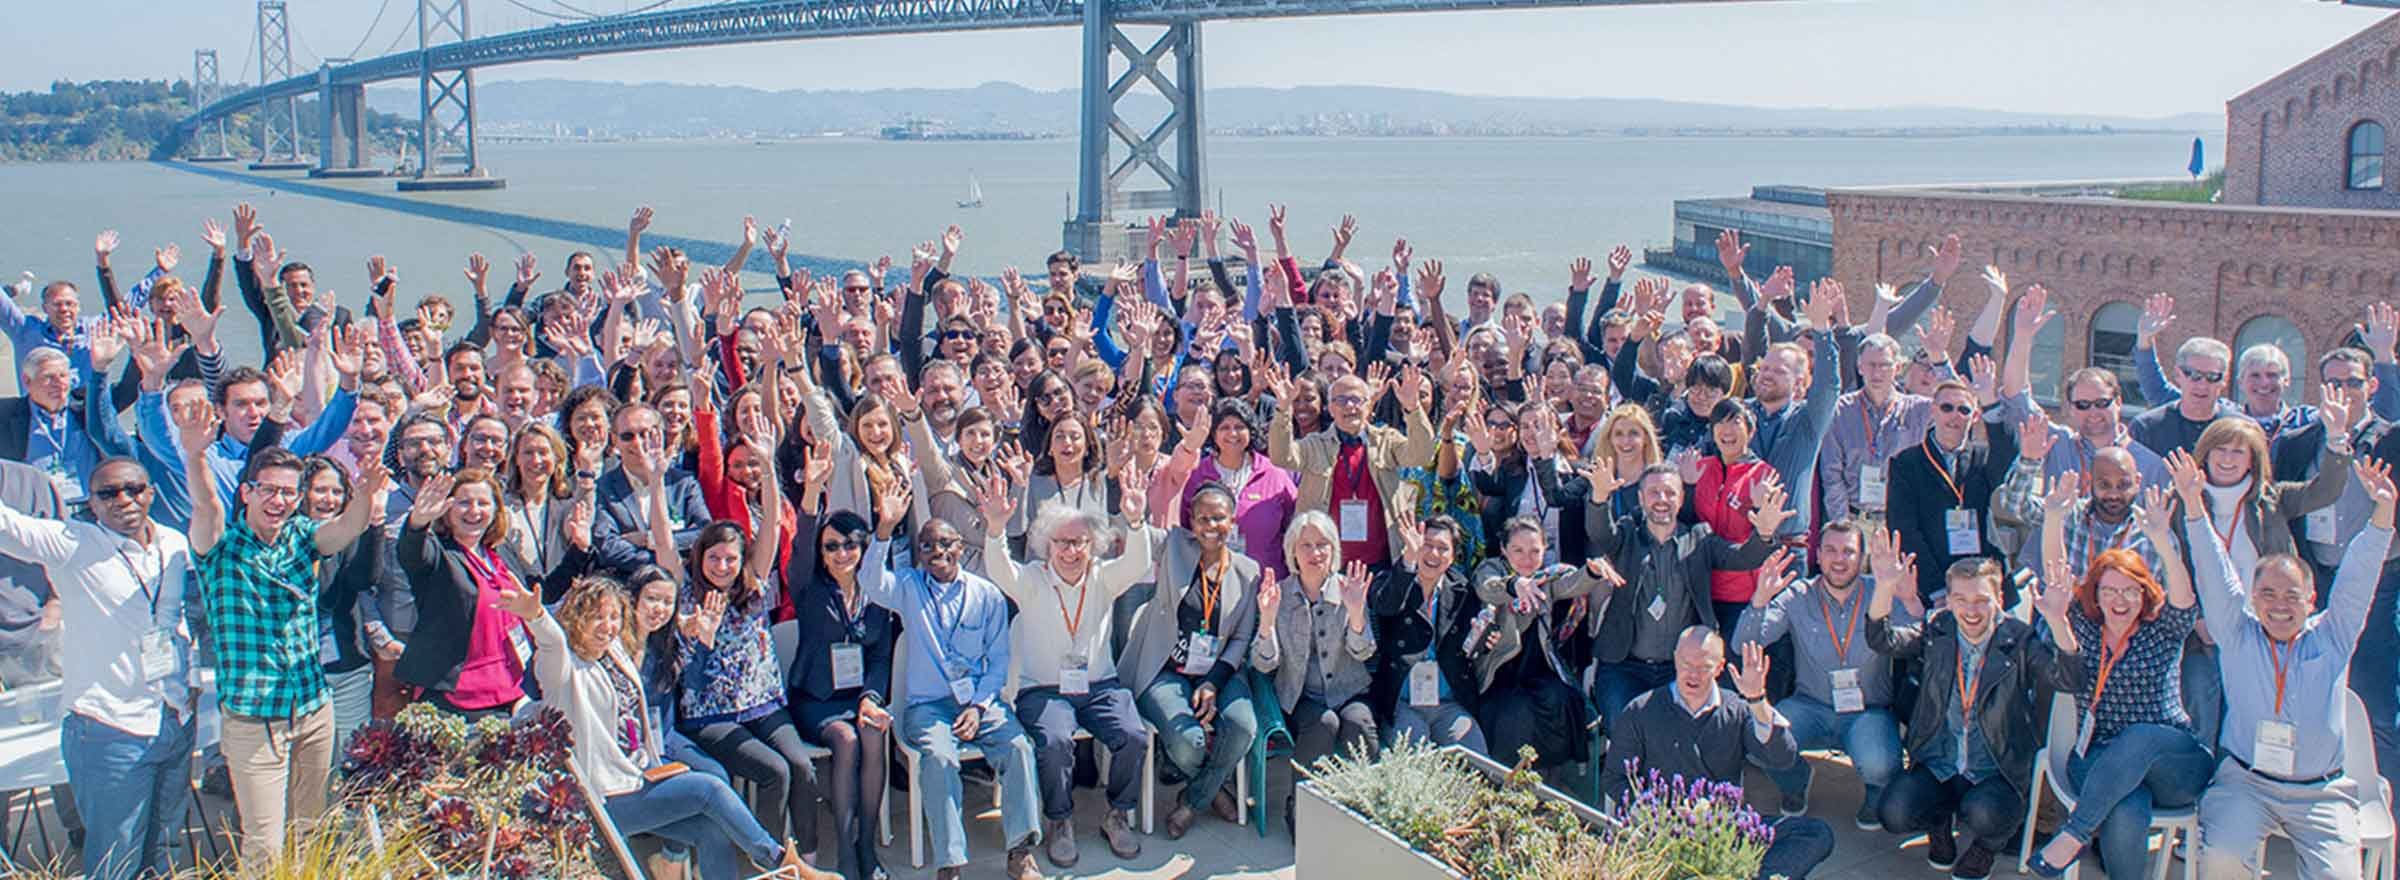 techsoup staff celebrating together in front of the bay bridge, representing the opportunity to invest in techsoup to build a more equitable planet